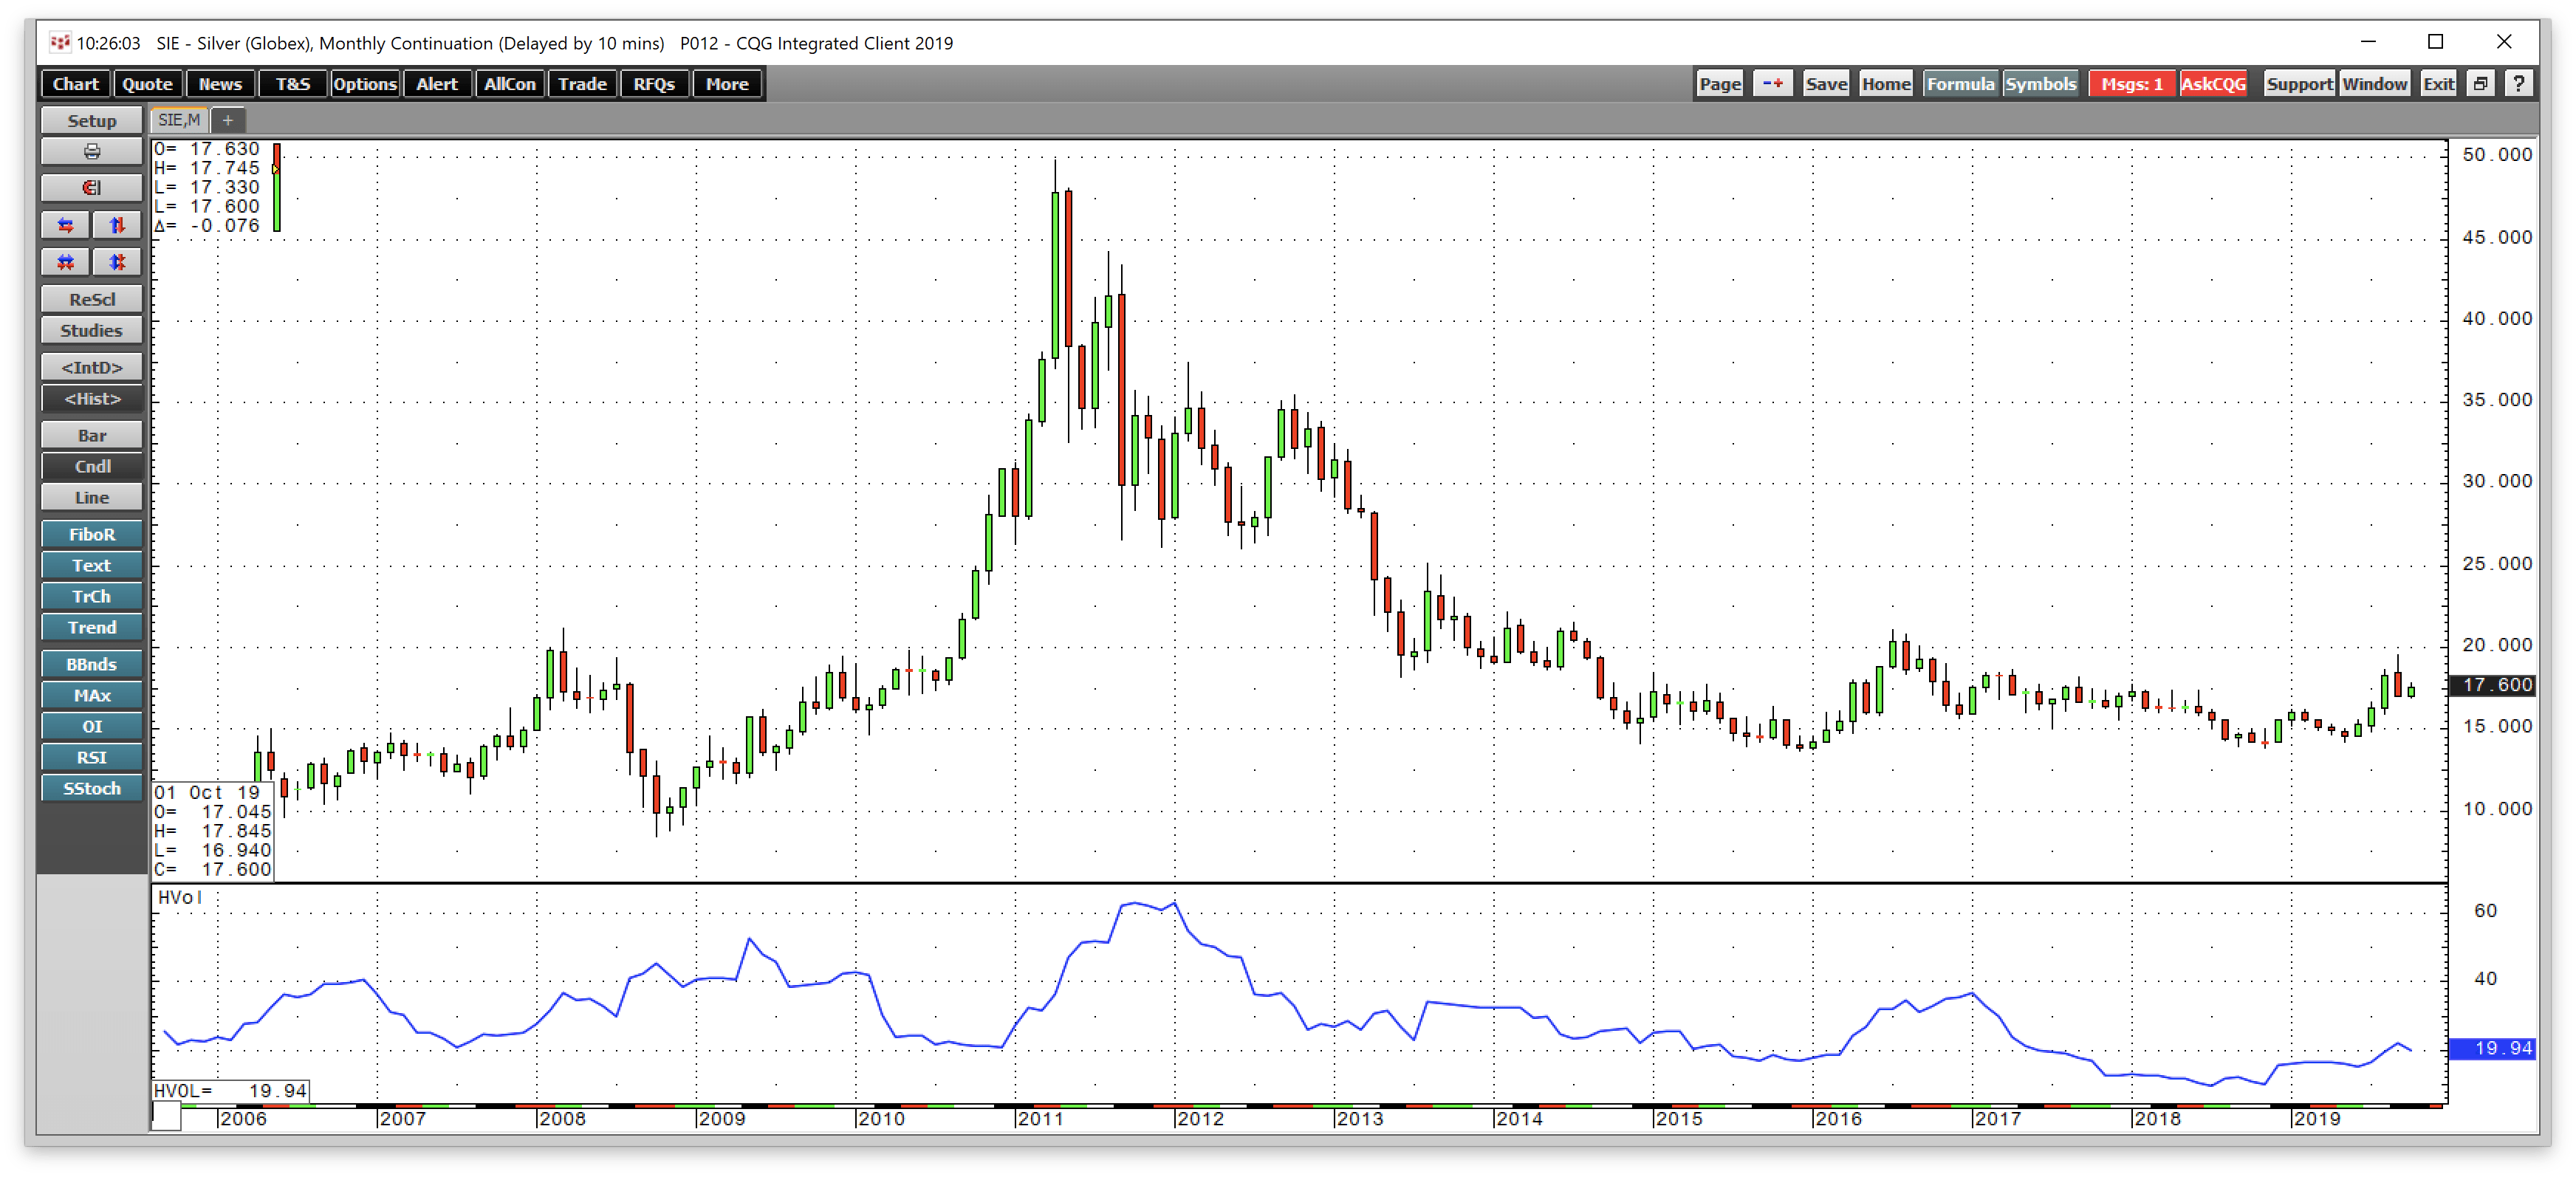 Price Of Silver Monthly Chart